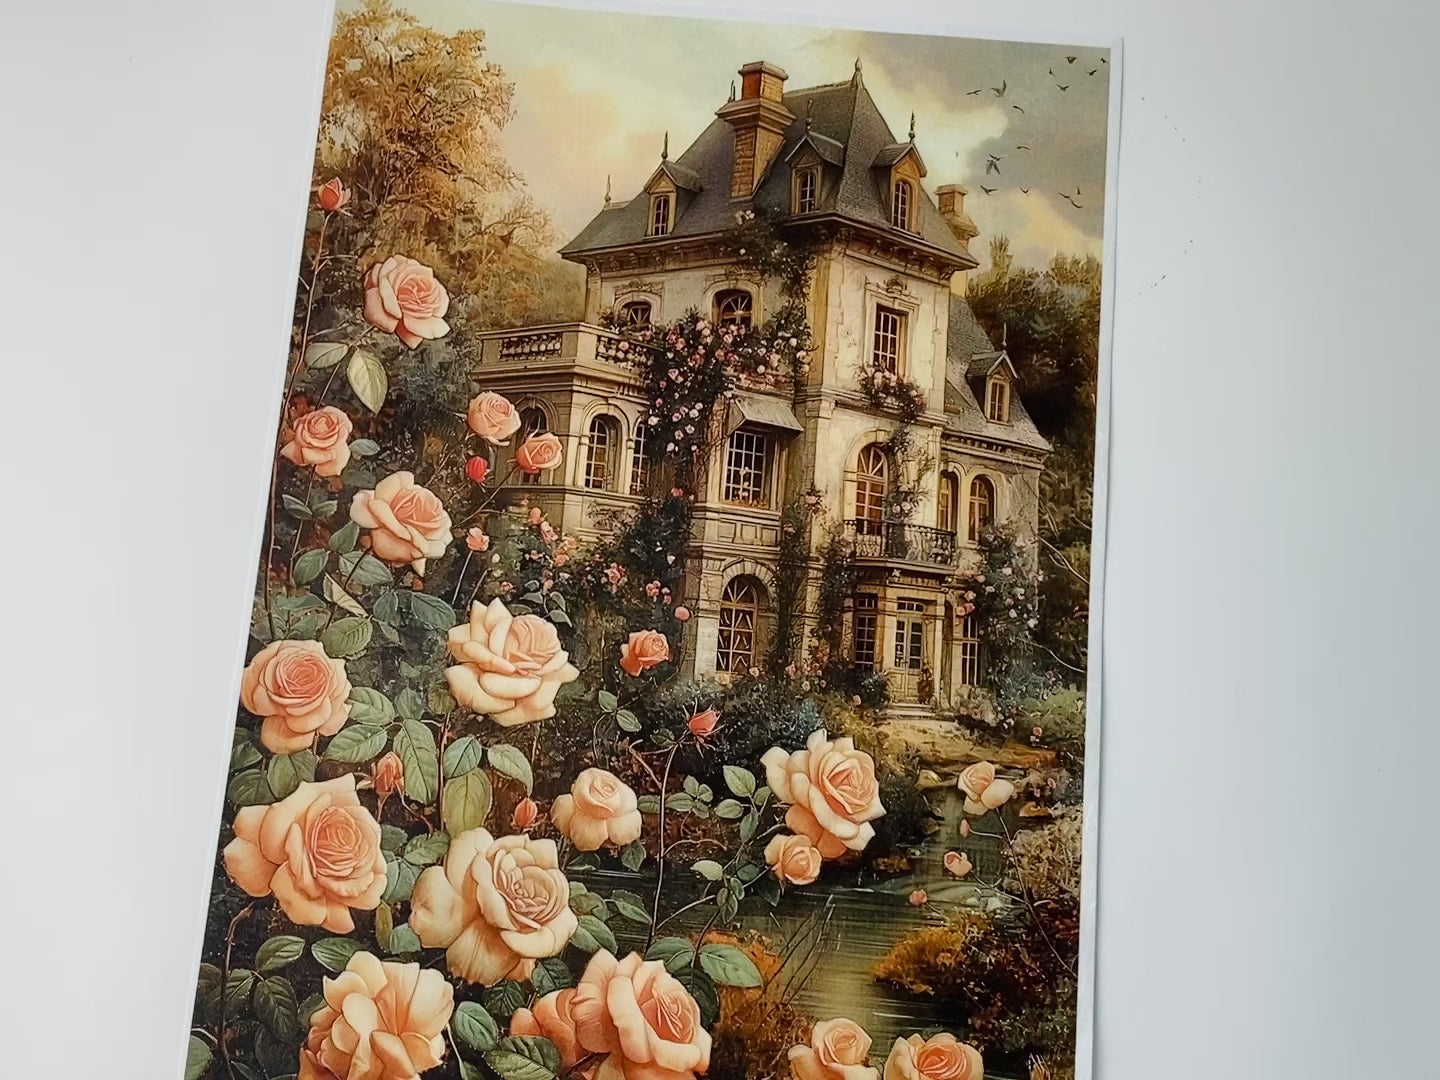 A 14 second video shows a close-up of AB Studio's Shabby Chic Victorian House A4 Plus rice paper and a hand lifting and flipping a corner to show the backside of the paper against a white background.